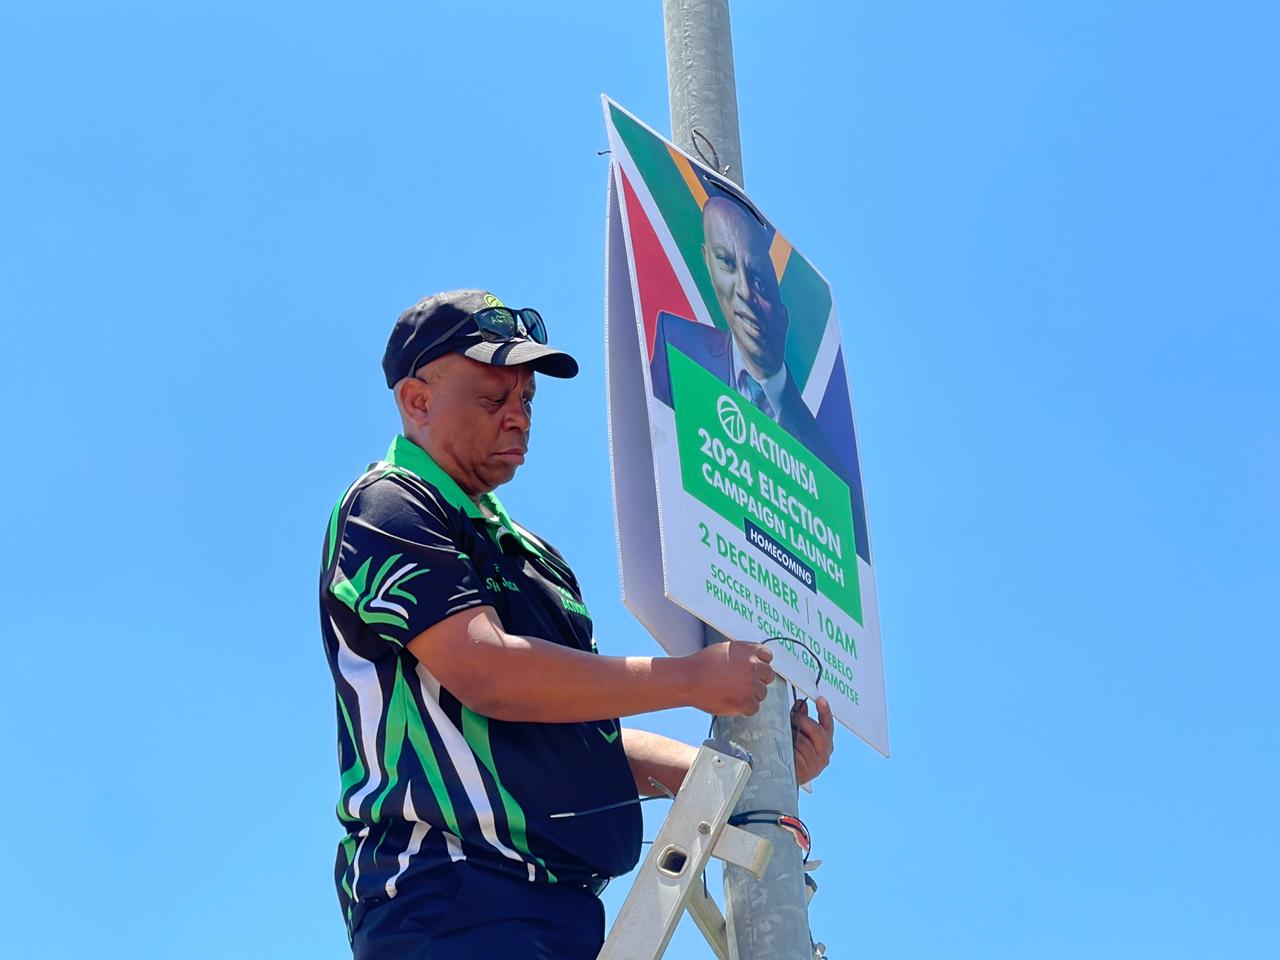 Presidents of ActionSA Herman Mashaba gear up for his campaign putting posters in Hammanskraal, Tshwane